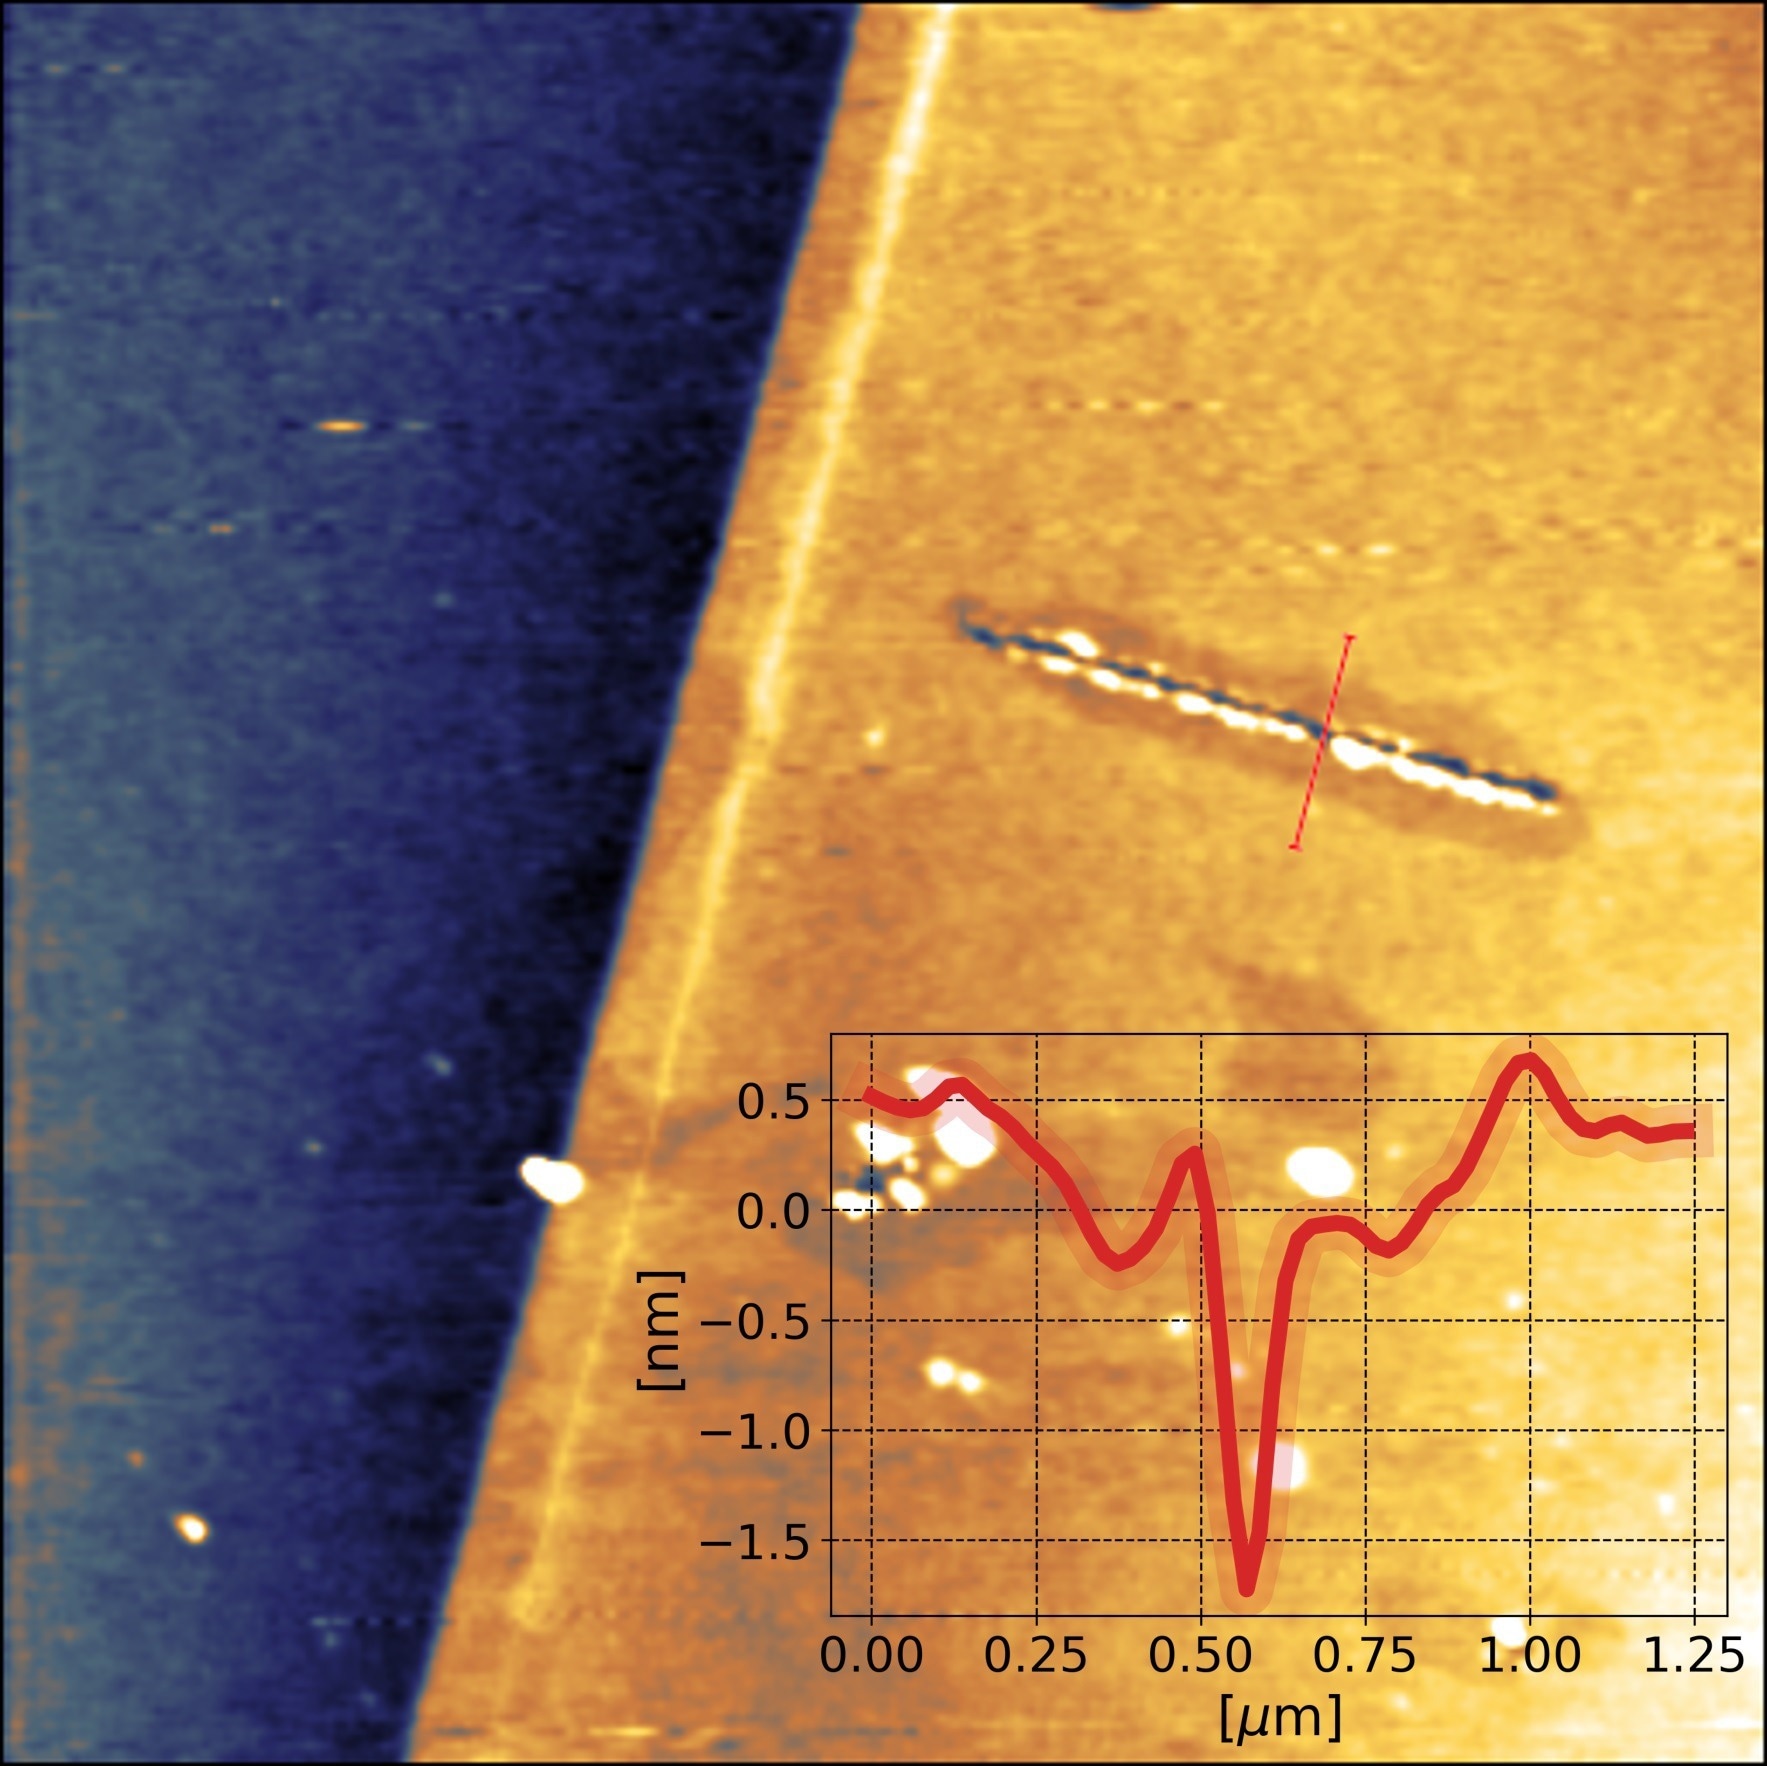 Cutting graphene by AFM lithography. AFM topography image of a multilayer graphene flake on Si substrate with lateral dimensions of 10 x 10 µm2 . Cuts were obtained by applying a 10V AC voltage at 500 kHz to the tip of a BudgetSensors ElectriTap190E cantilever (k = 48 N/m nominal) and following the designated path in Static Force Mode with an applied force of 5 µN at a speed of 100 nm/s. The relative humidity was 42%.